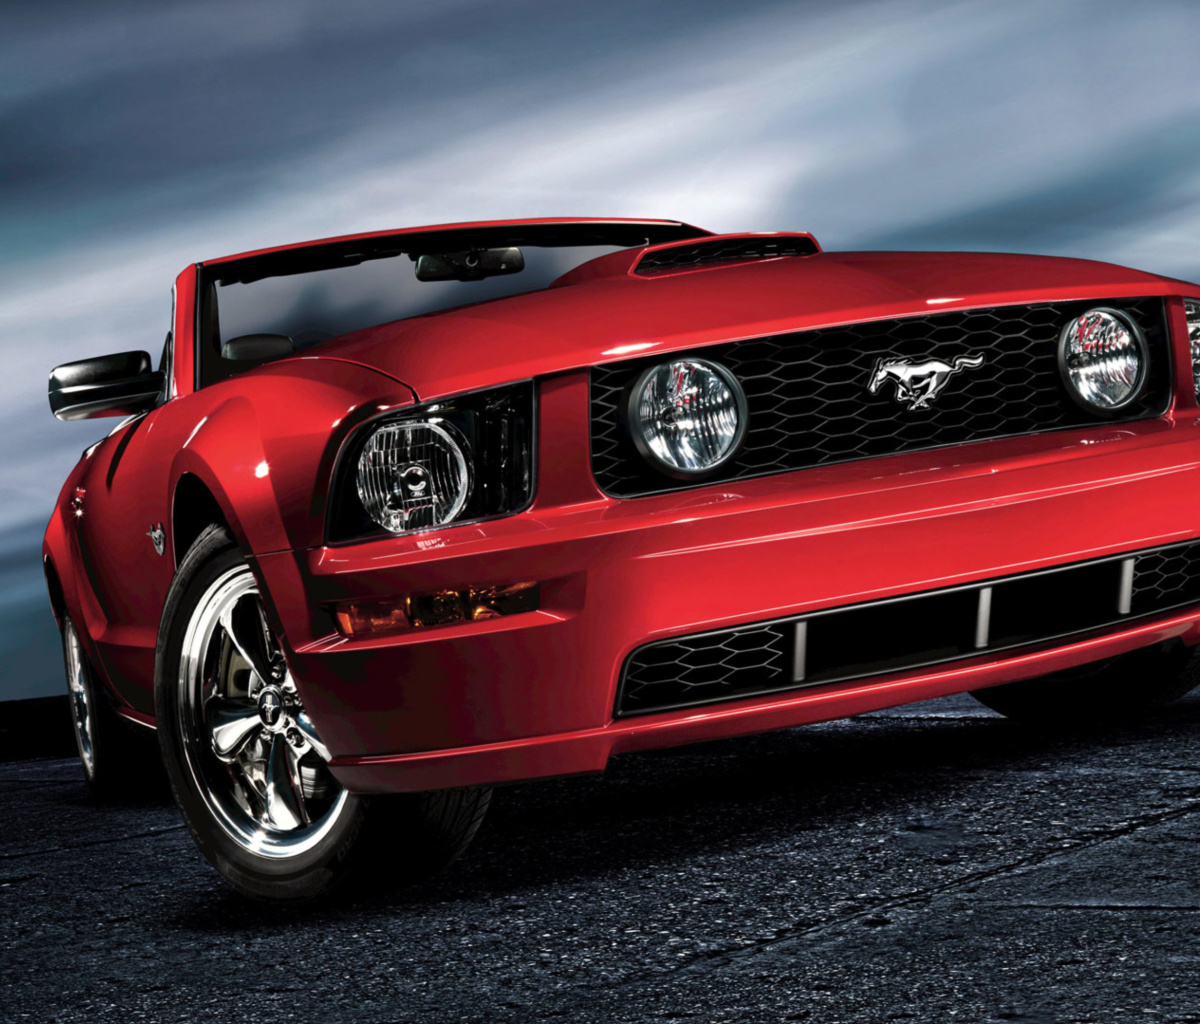 Das Ford Mustang Shelby GT500 Wallpaper 1200x1024